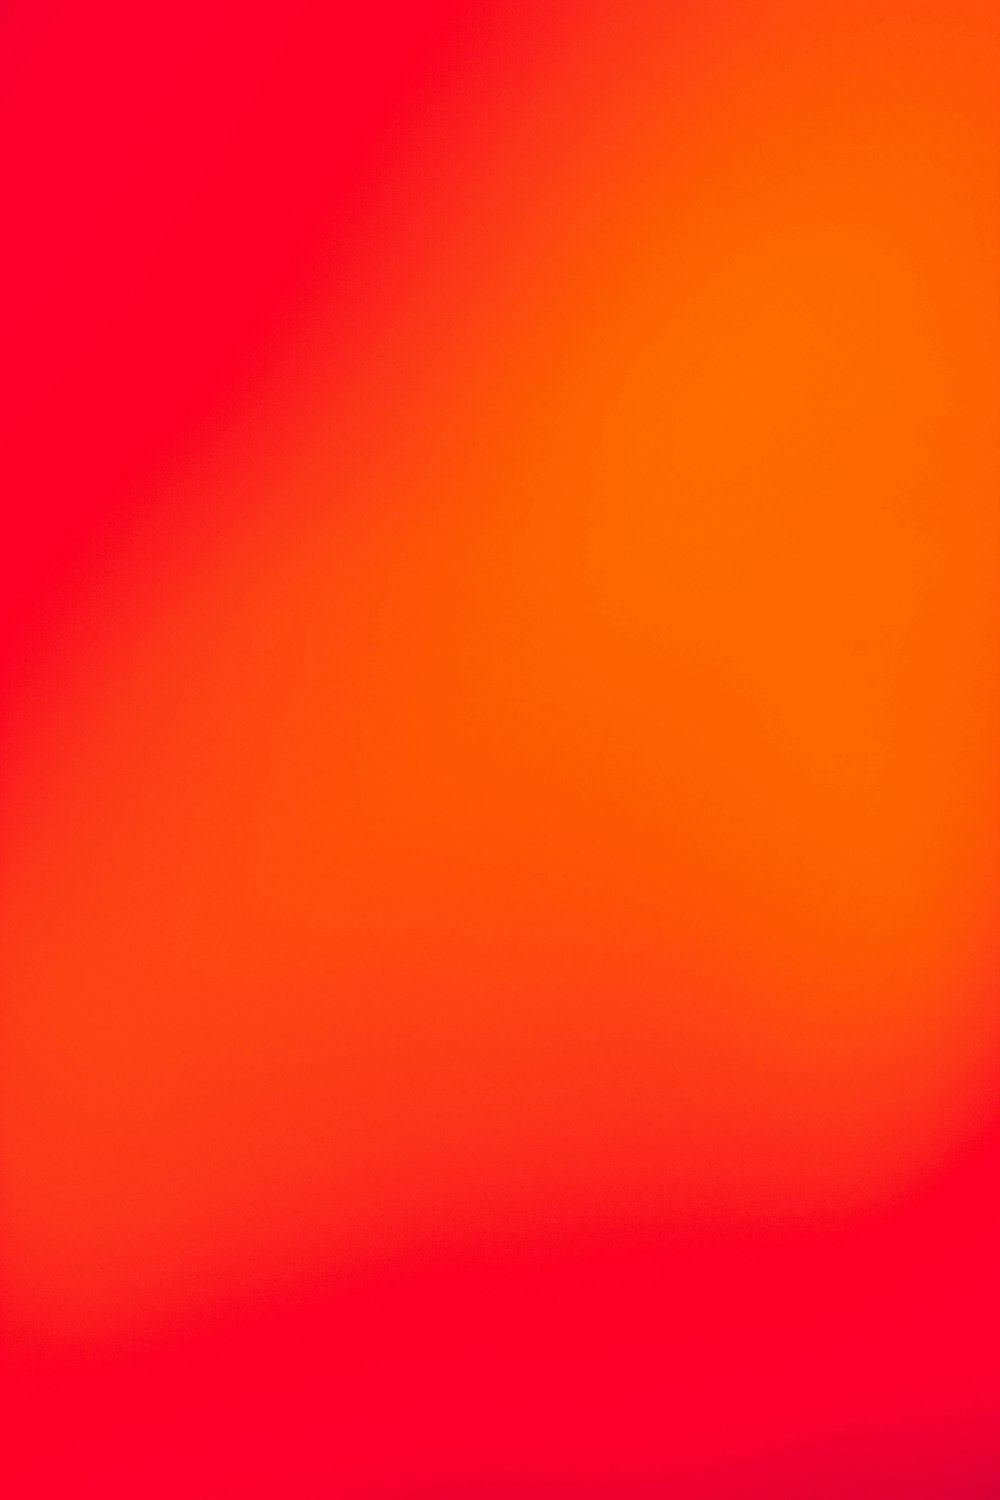 Red Wallpapers: Free HD Download [500+ HQ] | Unsplash